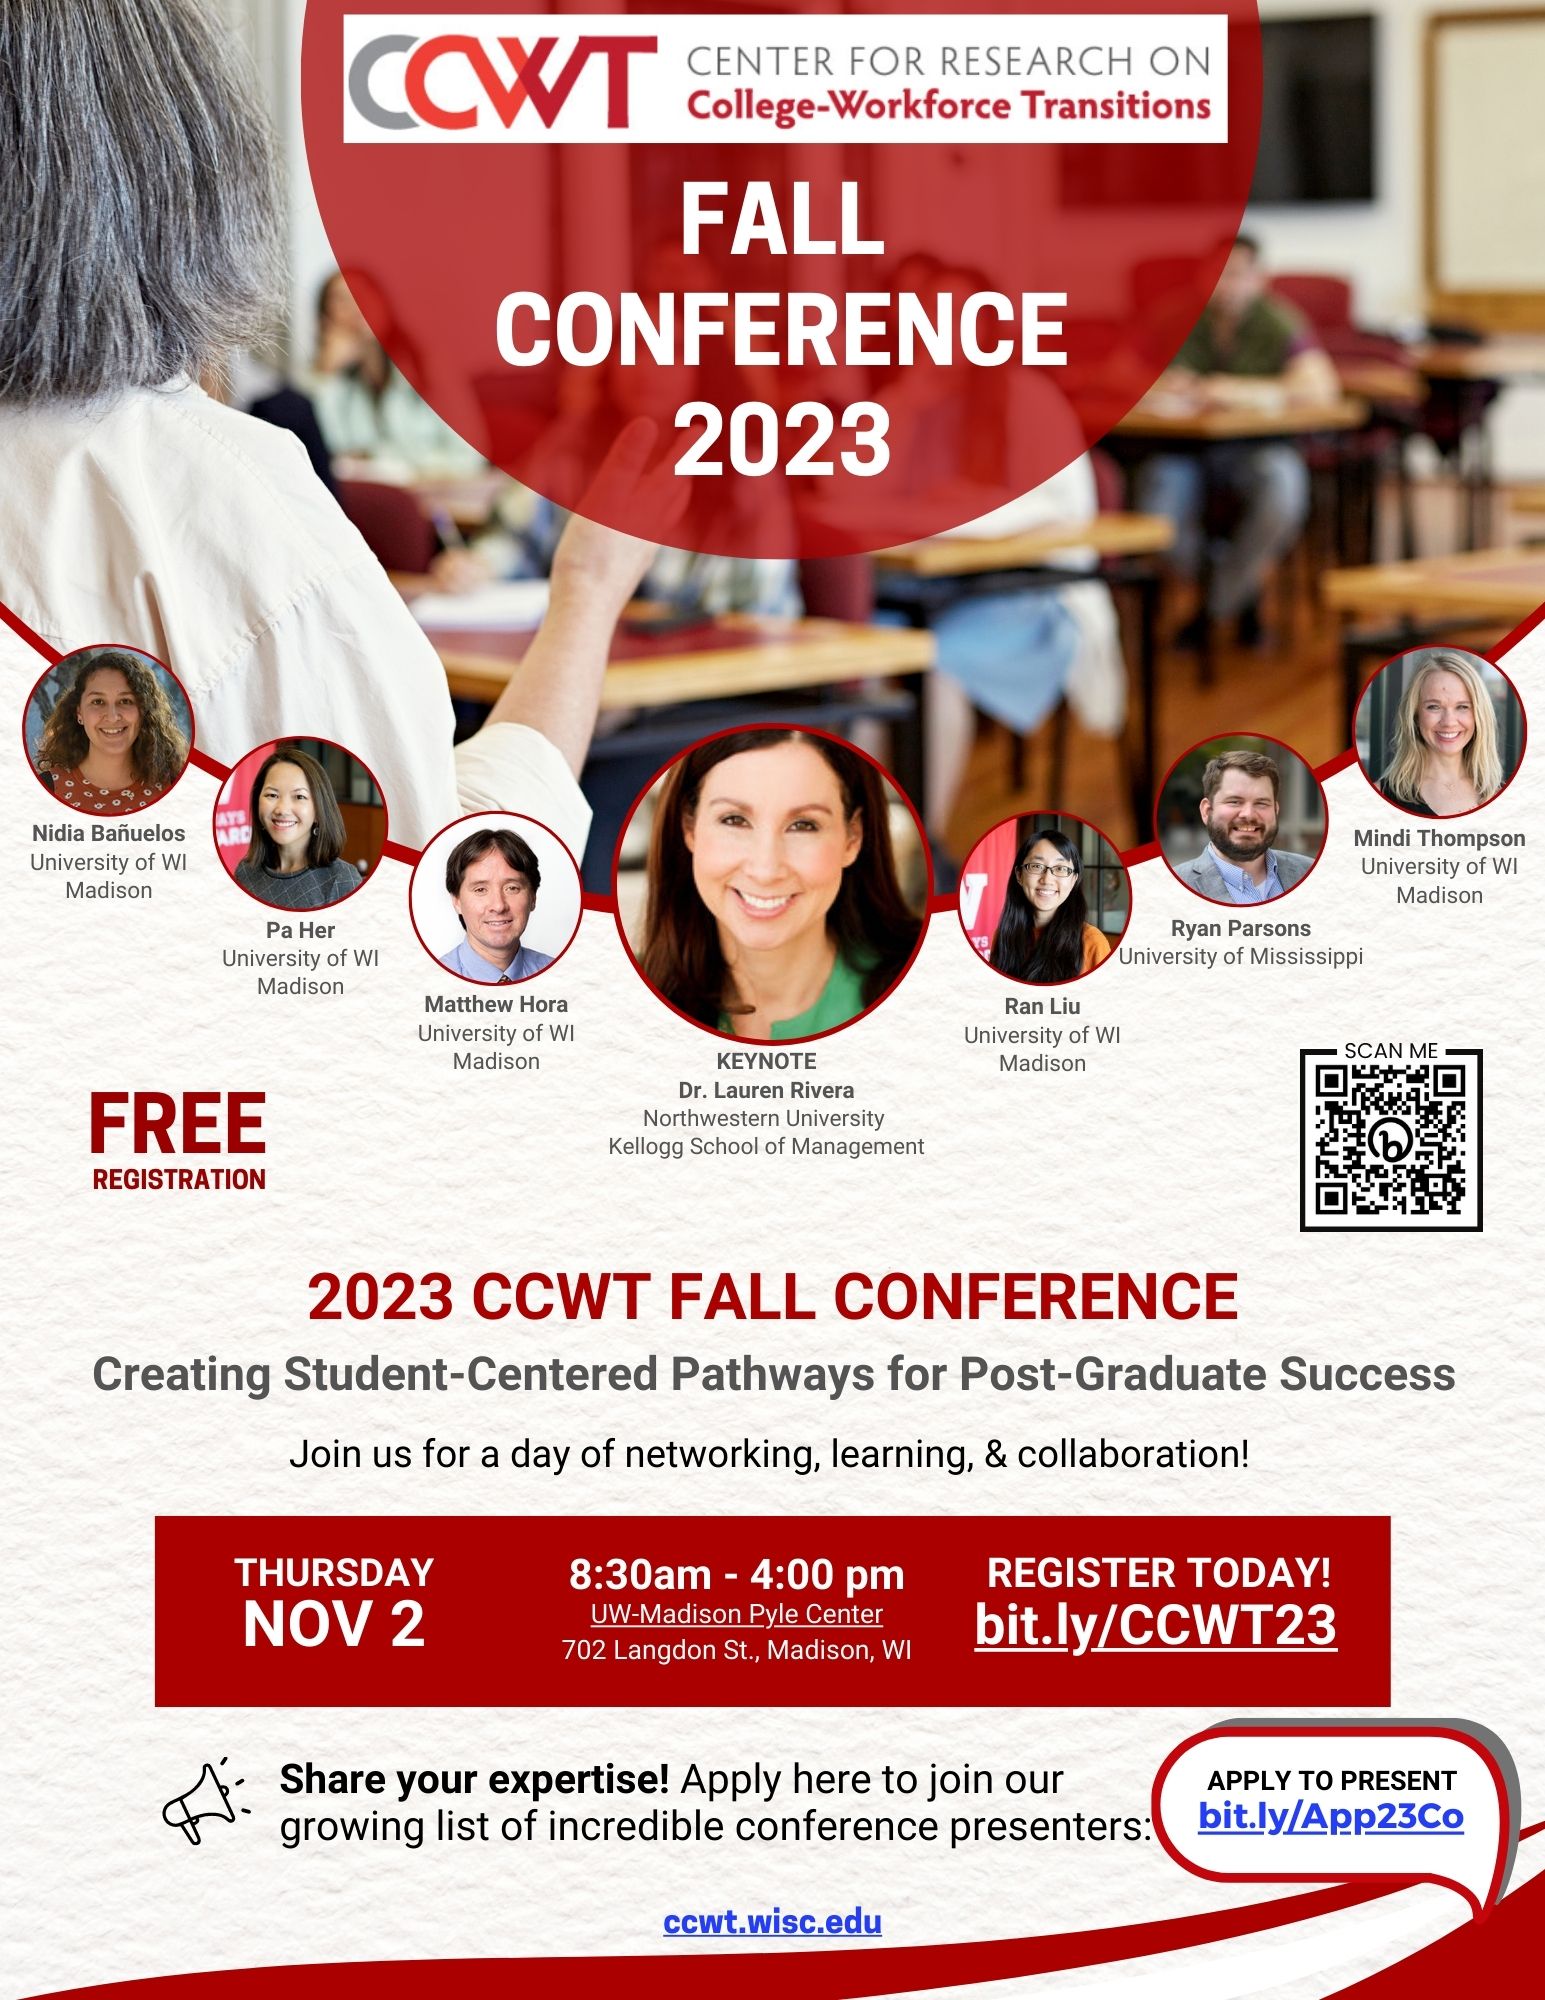 Center for Research on College-Workforce Transition (CCCWT) Fall Conference Flyer https://ccwt.wisc.edu/wp-content/uploads/2023/08/2023-Fall-Conference-Flyer-11-1.pdf